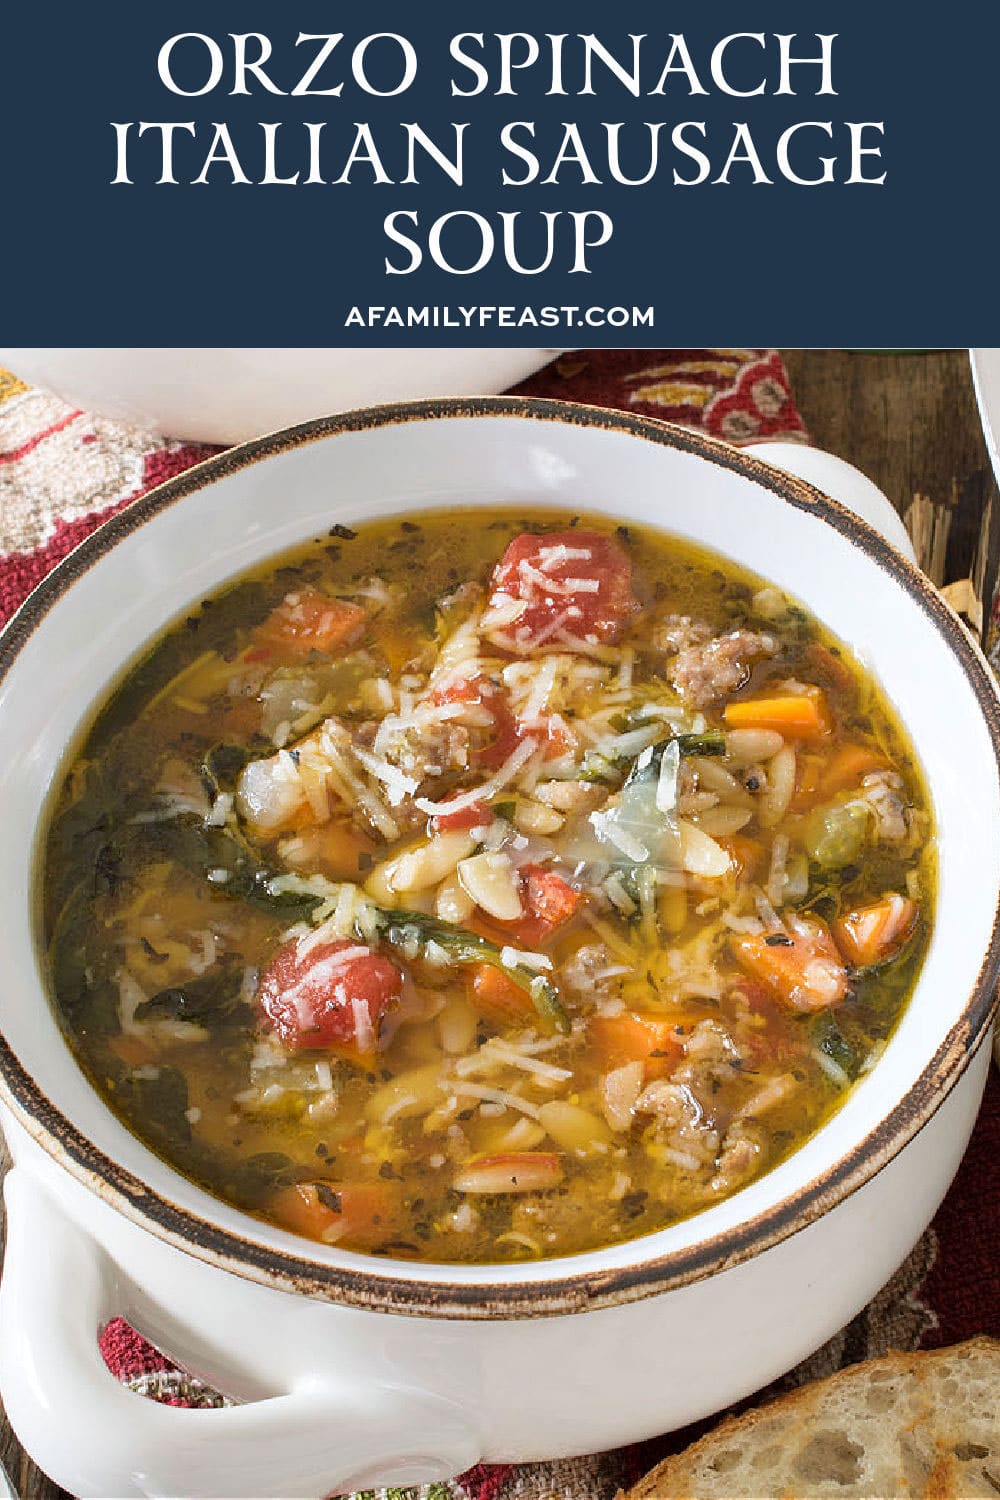 Orzo Spinach Italian Sausage Soup 